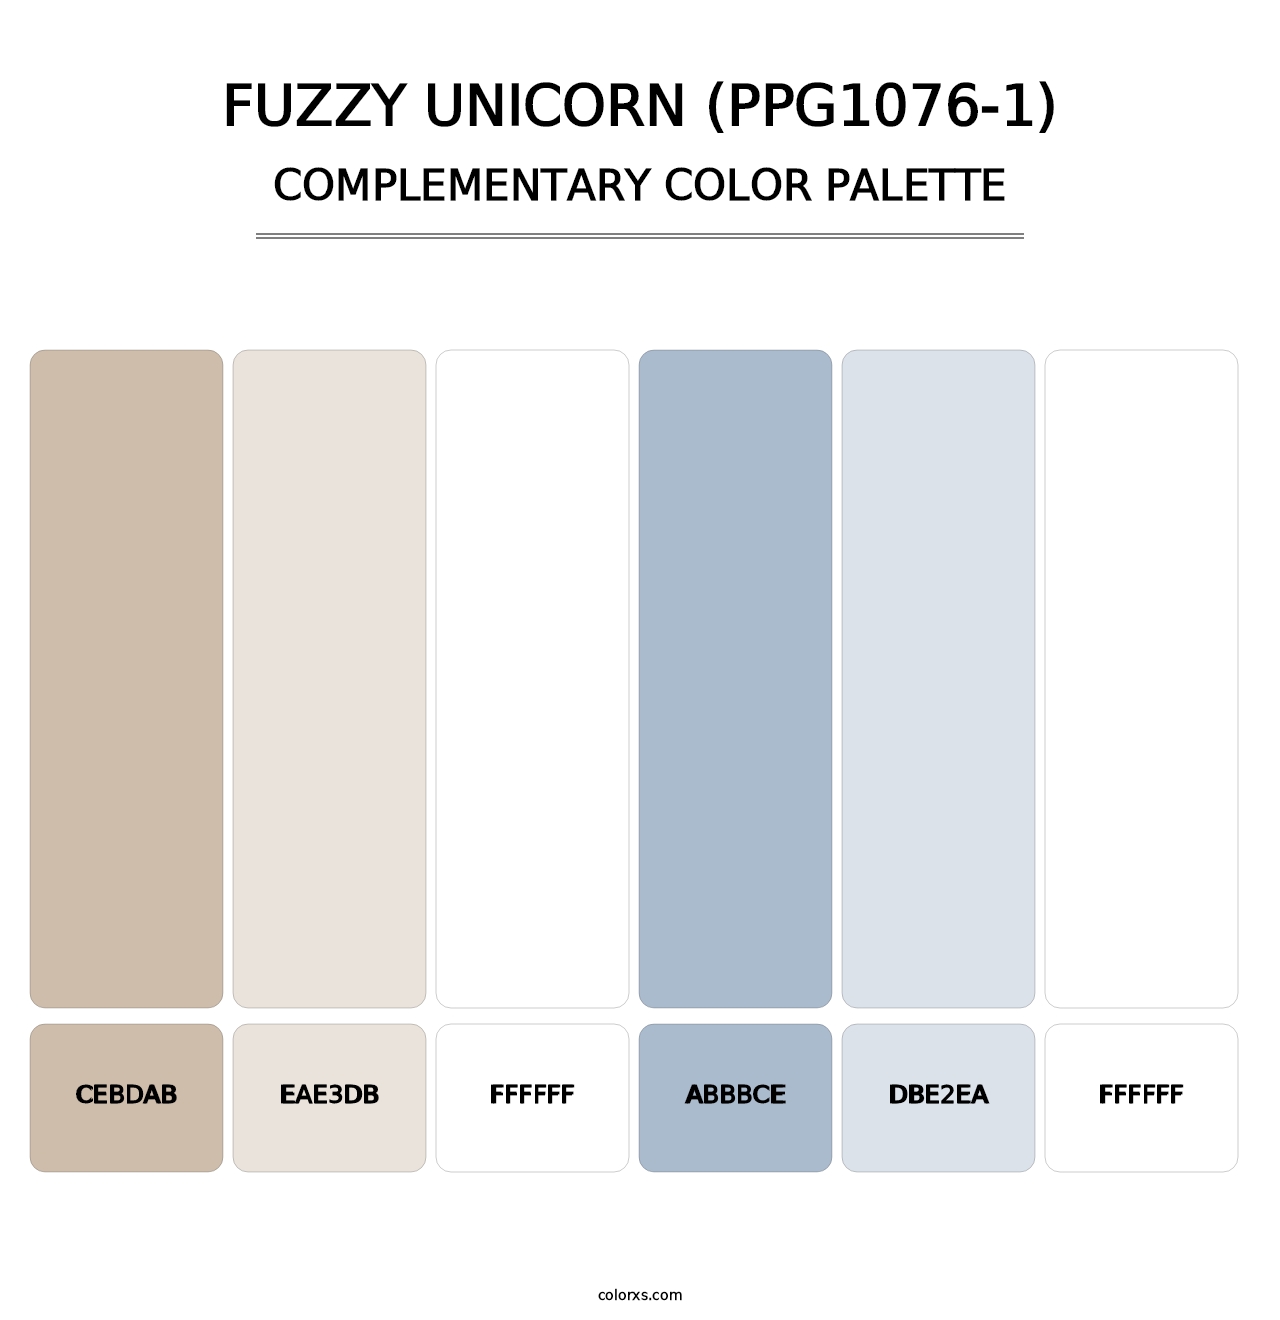 Fuzzy Unicorn (PPG1076-1) - Complementary Color Palette